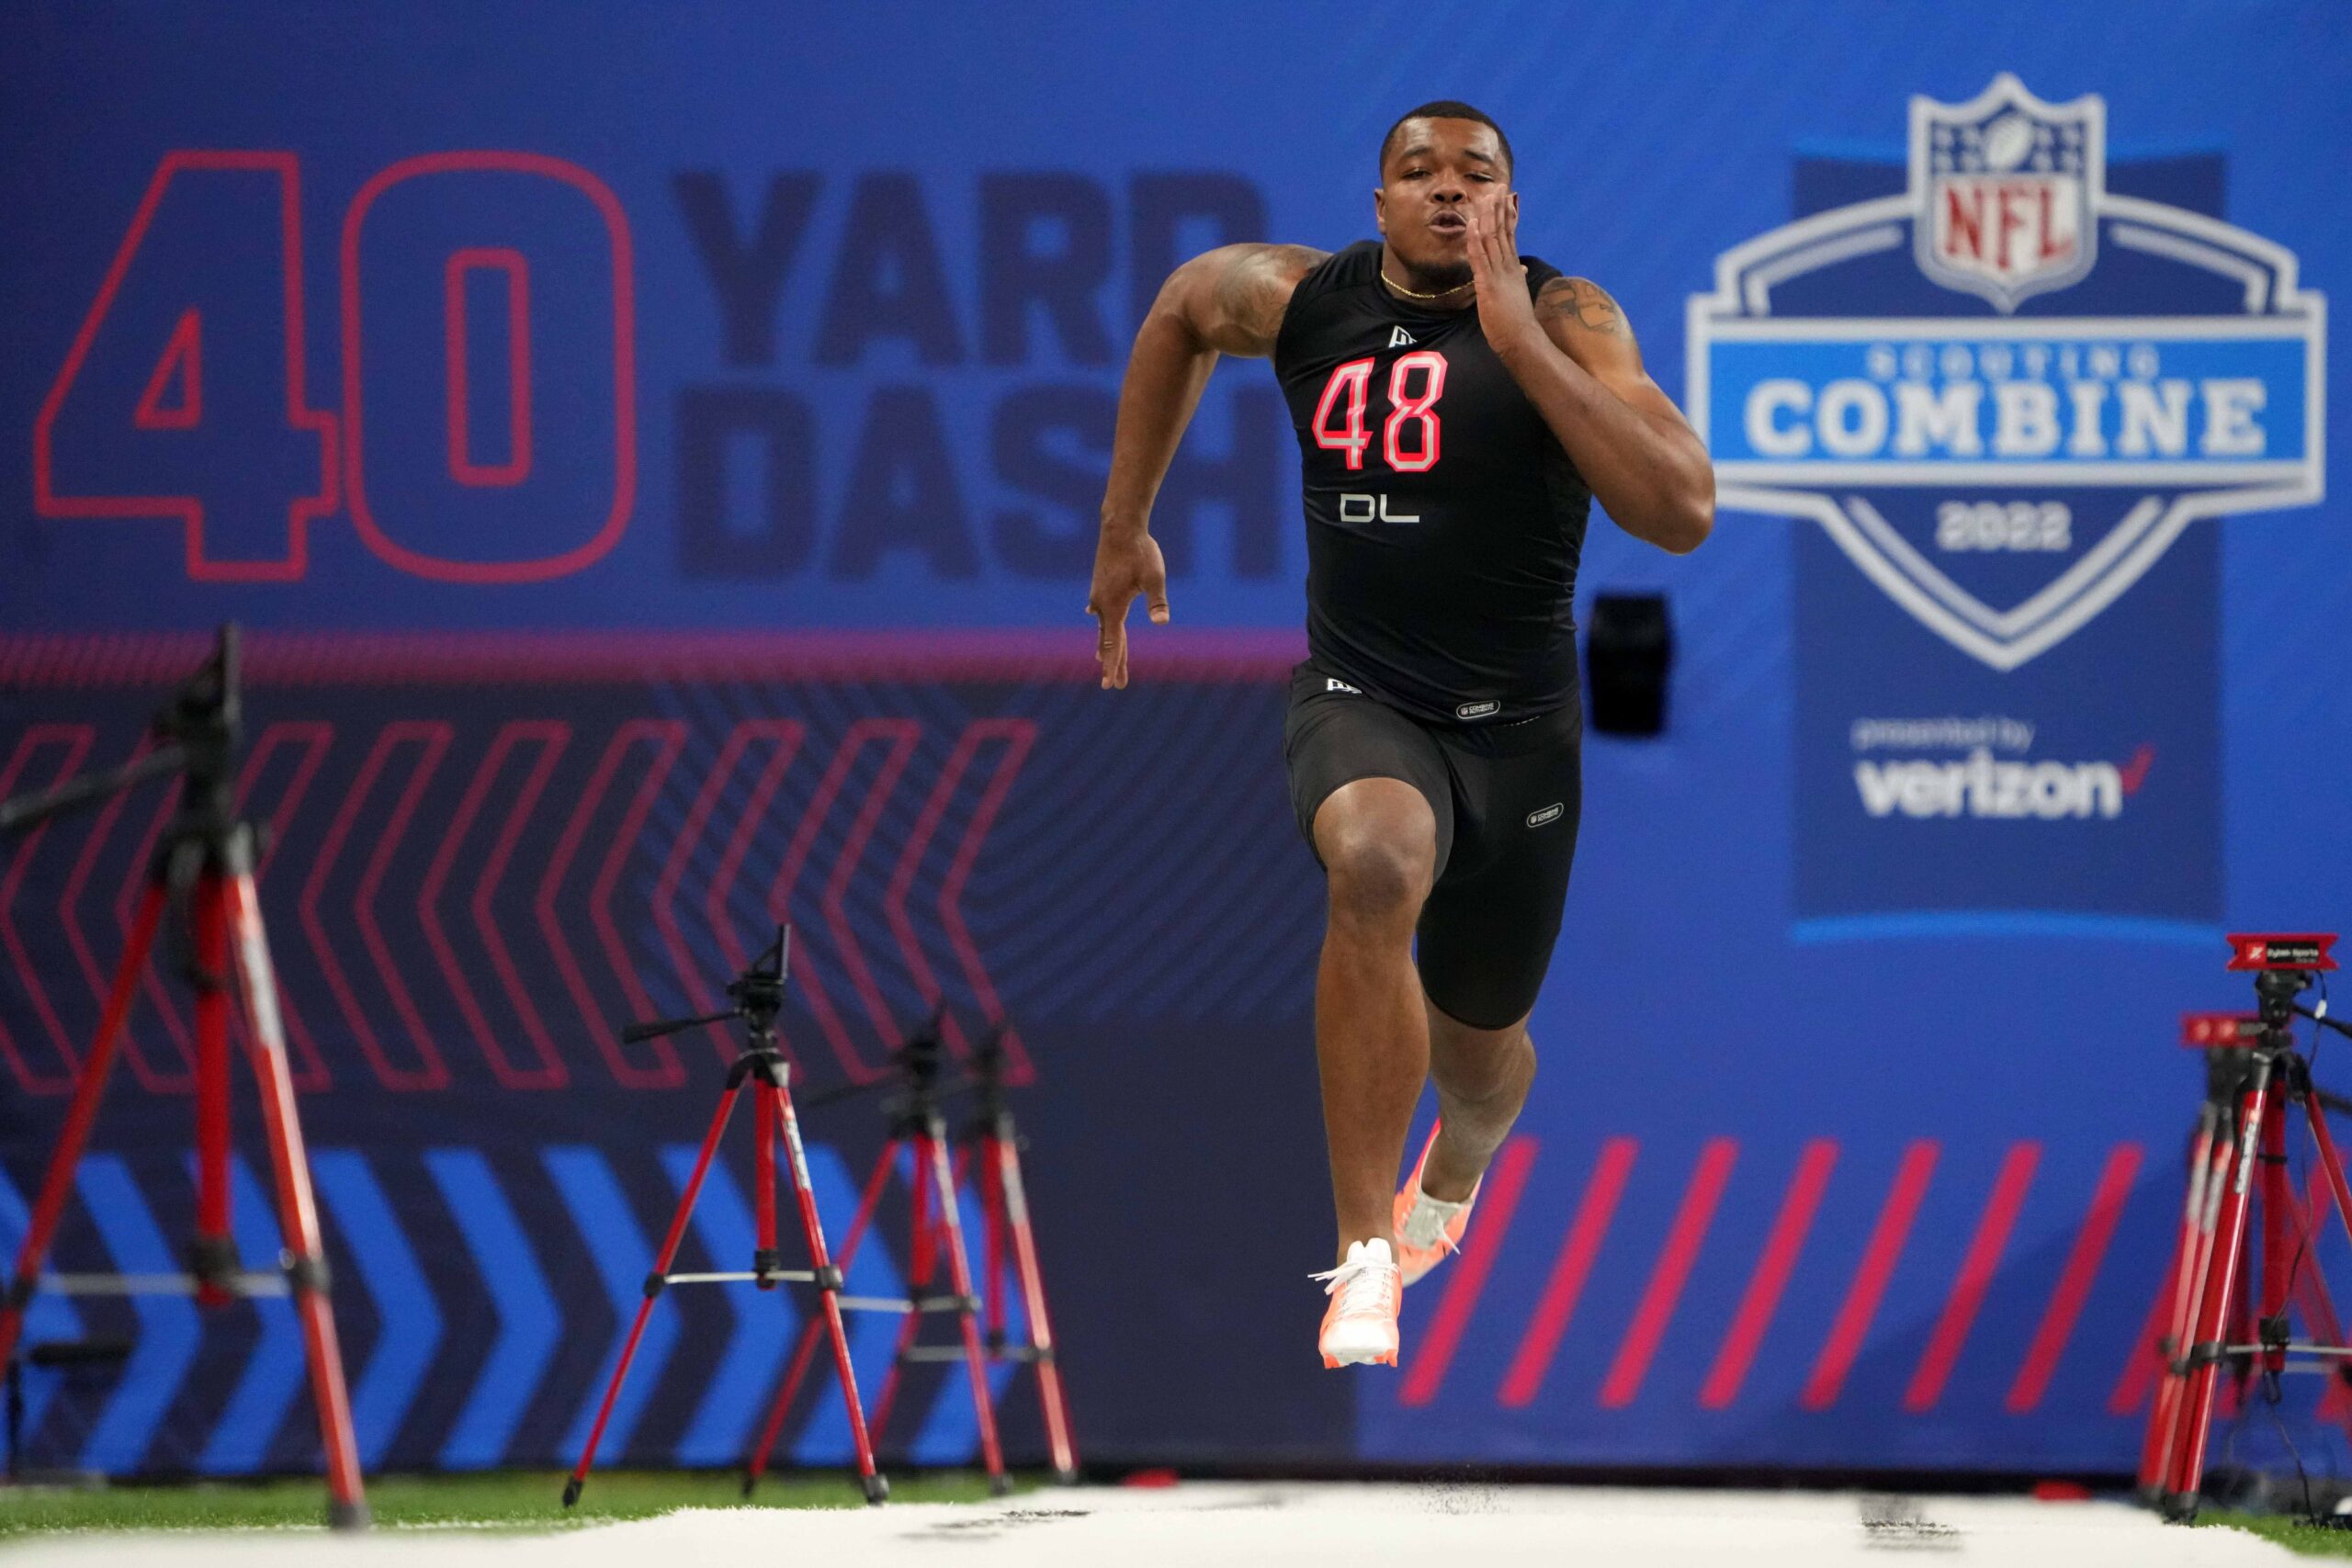 2023 NFL Combine results: 15 standouts from the offensive line